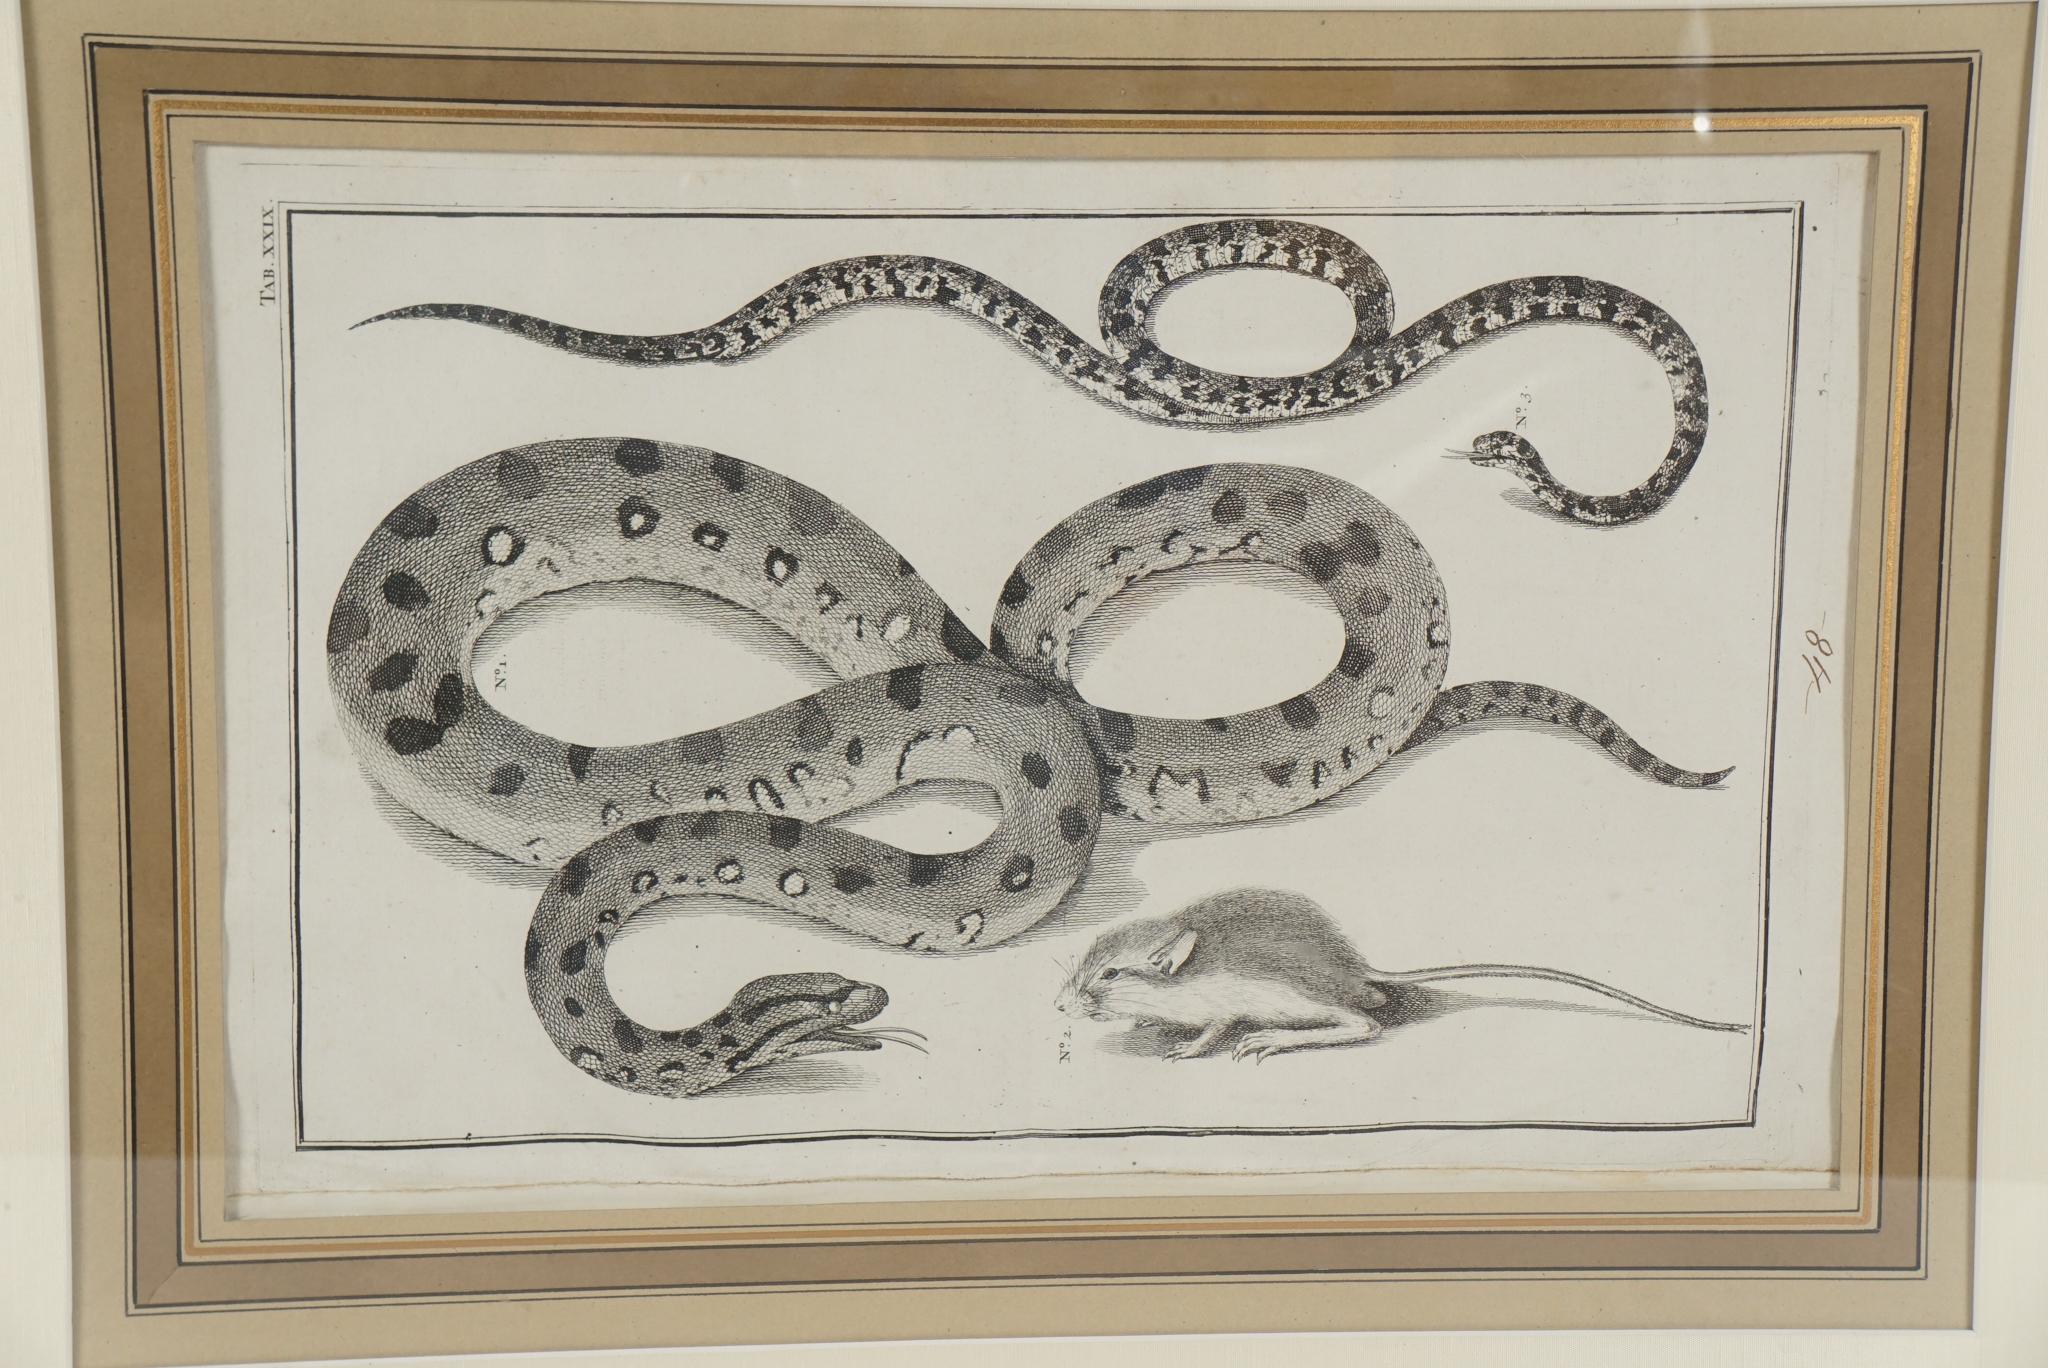 Four Framed Early 19th Century Large Folio Engravings of Lizards, Snakes & Bats For Sale 2